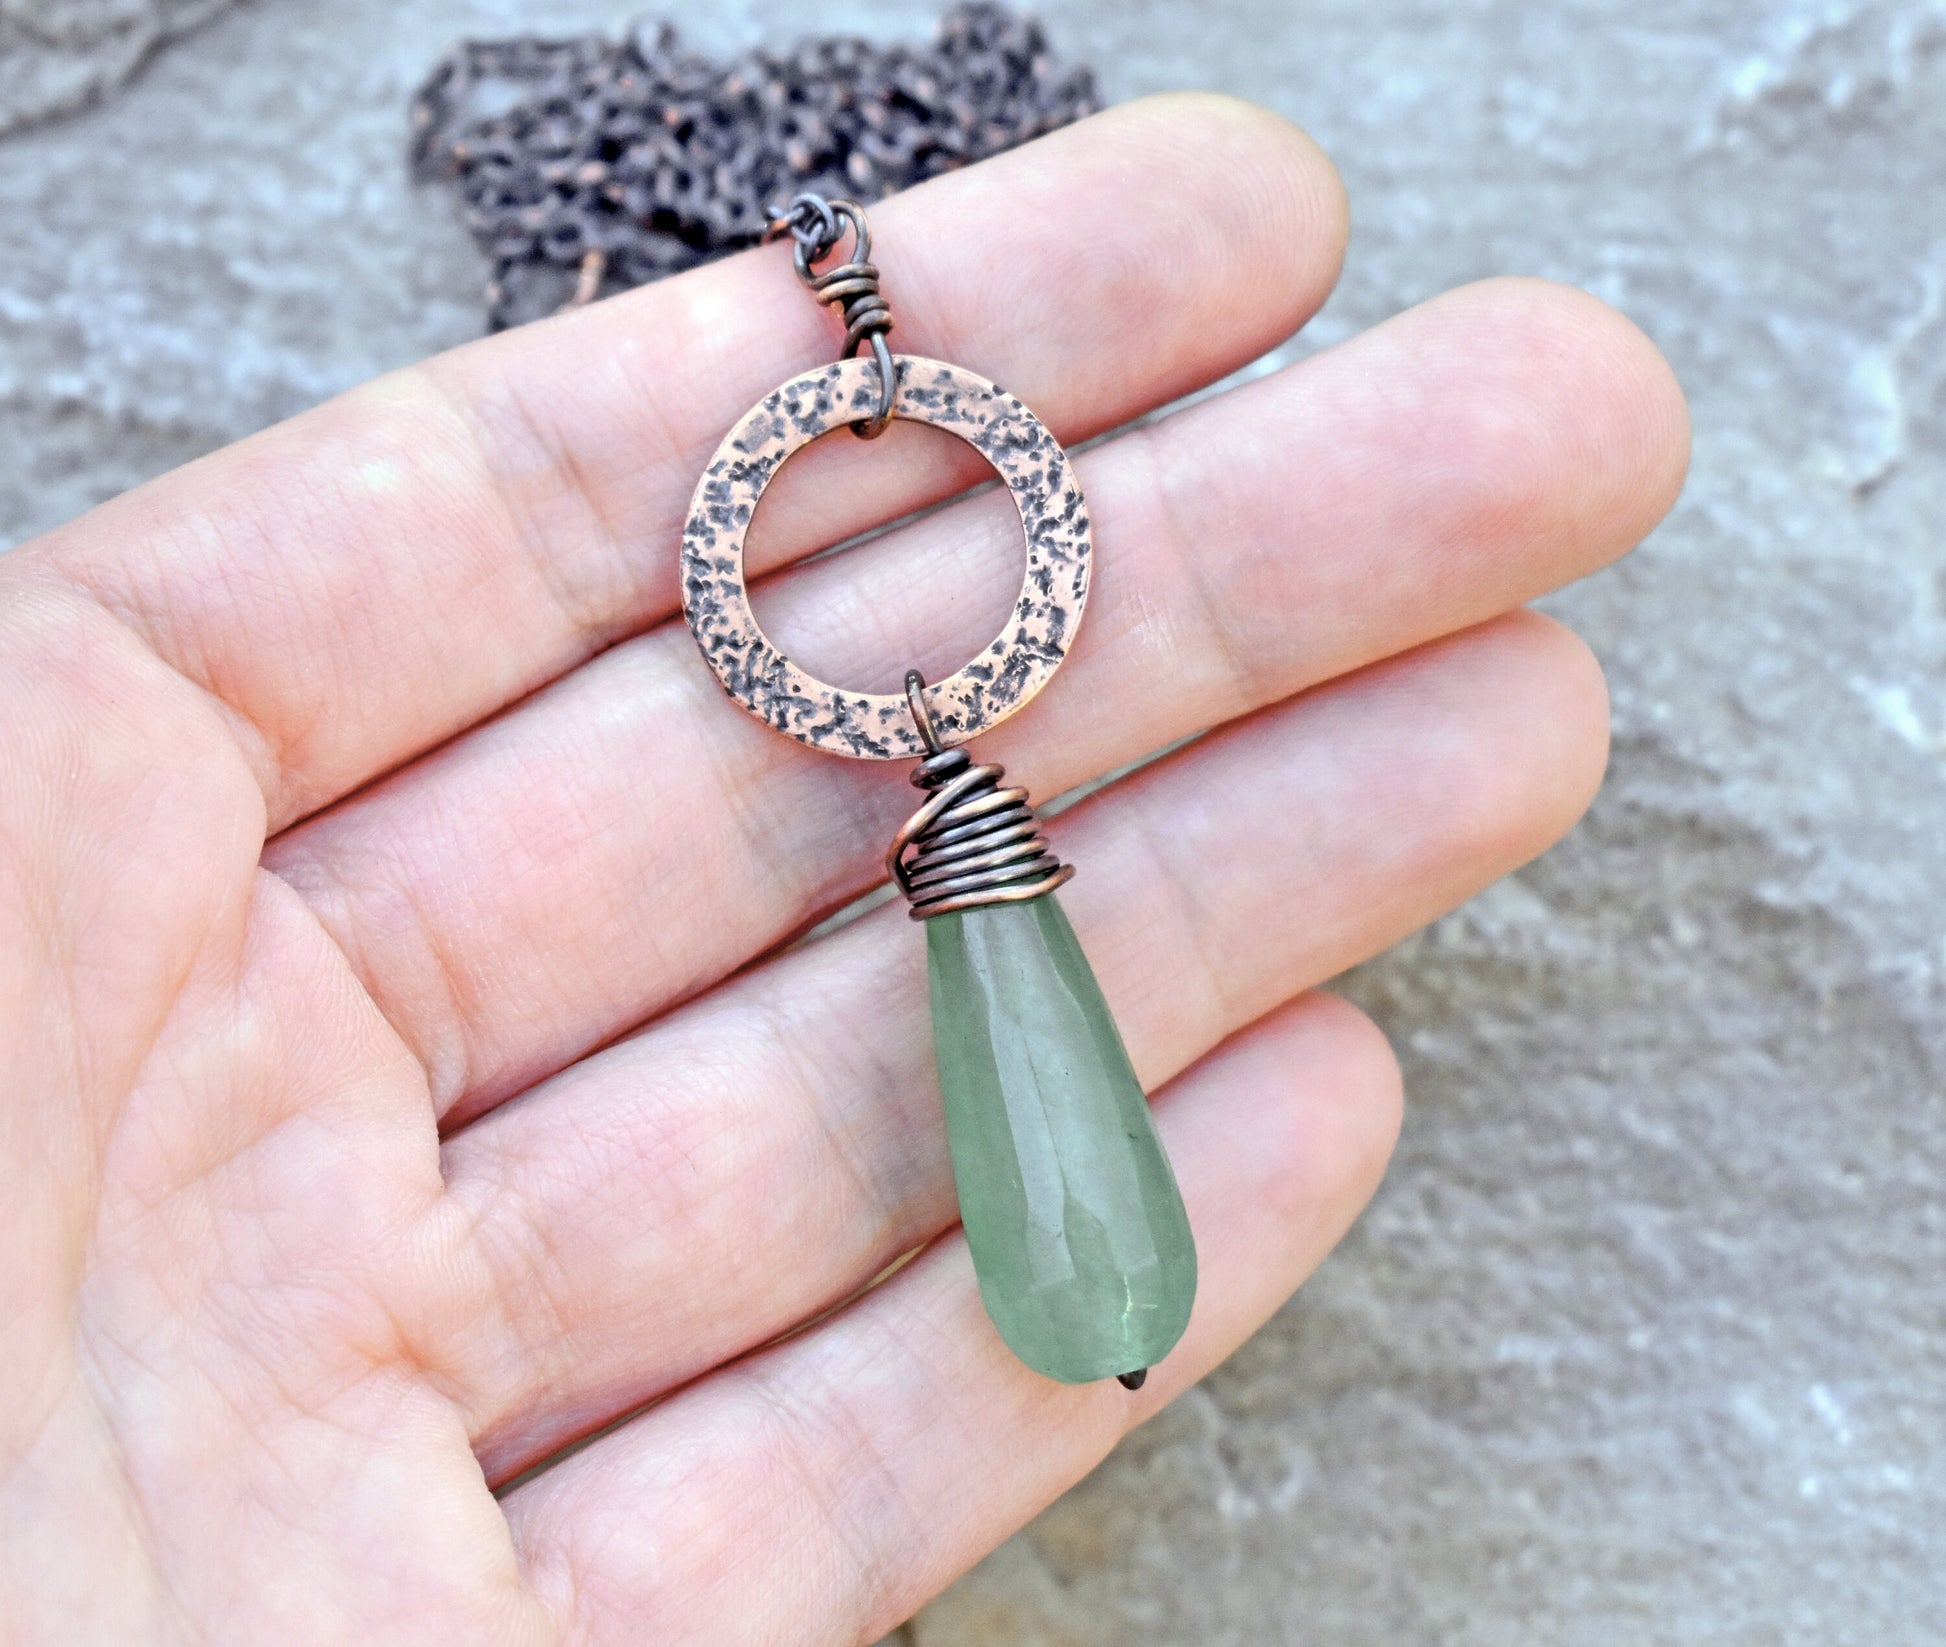 Jade Teardrop Necklace, Faceted Light Green Gemstone Jewelry, Hammered Copper Washer Pendant, Unique Artisan Rustic Metal